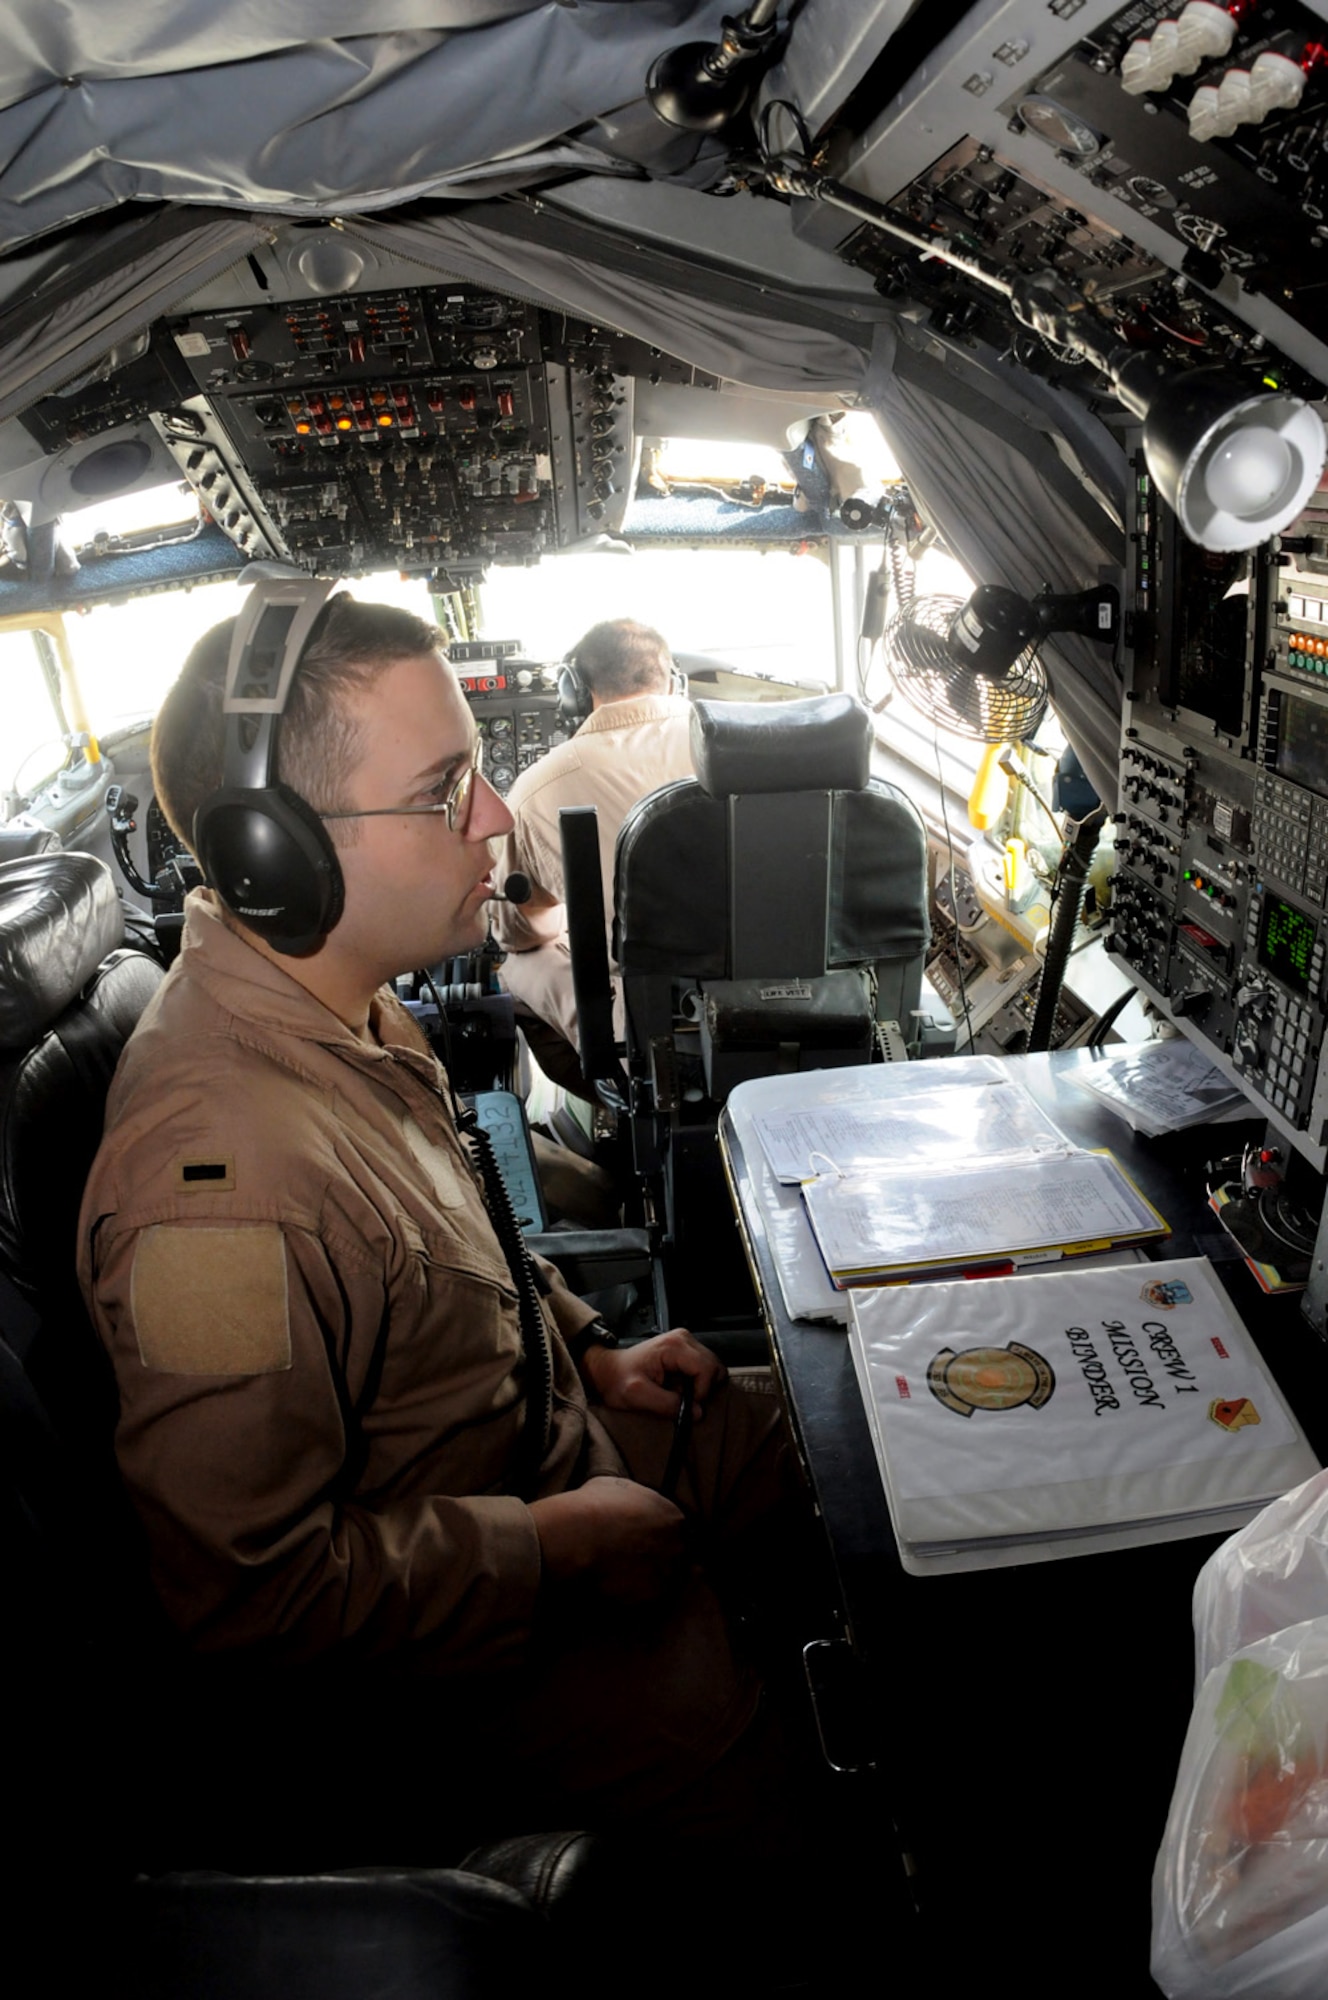 Navigator 1st Lt. Eric Myatt performs a cross-check inside a RC-135 Rivet Joint aircraft in preparation for take off Jan. 30. Based out of Southwest Asia, the RC-135 has maintained a presence in the Central Command area of responsibility since August 1990. The lieutenant is with the 763rd Expeditionary Reconnaissance Squadron.  (U.S. Air Force photo/Senior Airman Domonique Simmons)